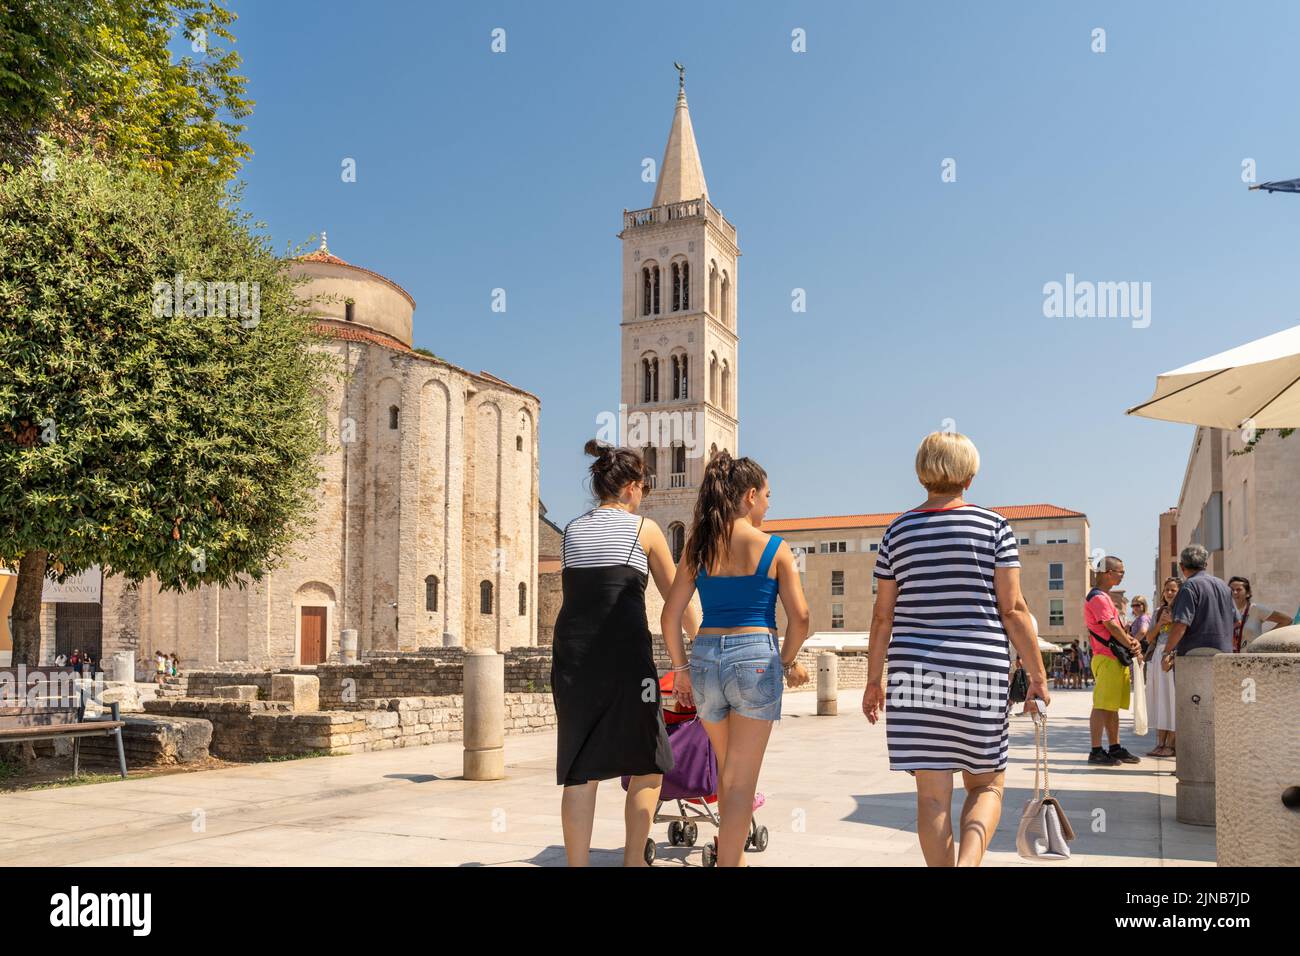 The Church Of St. Donatus In The City Of Zadar Croatia With Numerous Tourists And Holidaymakers Stock Photo